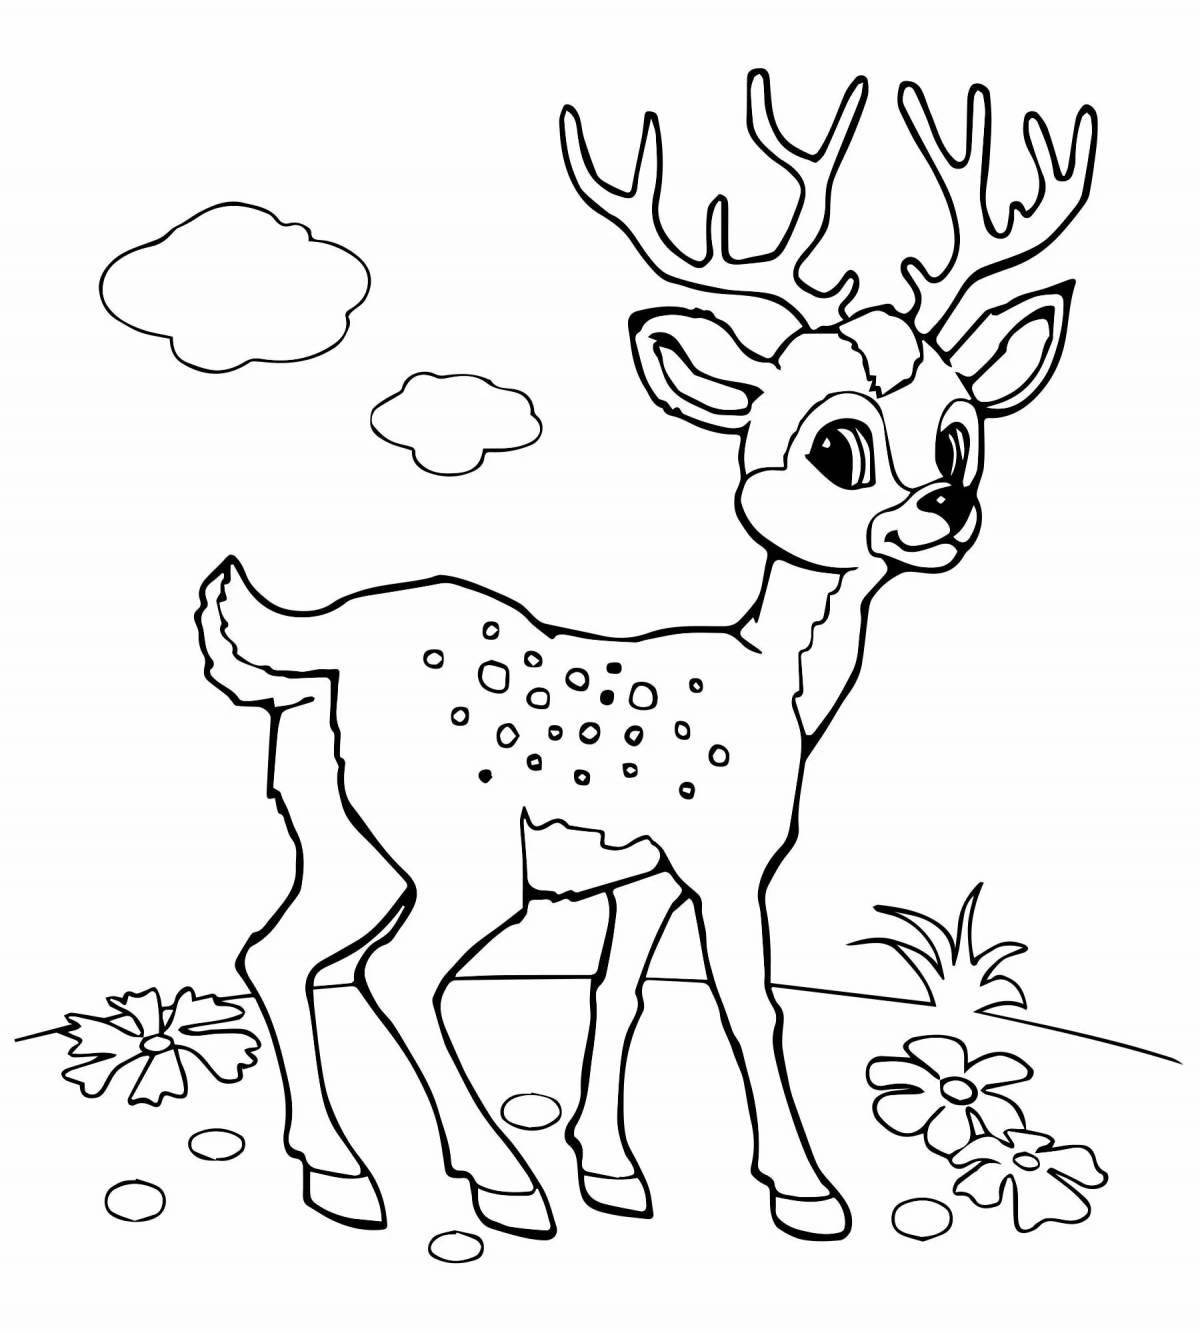 Fun coloring of forest animals for children 6-7 years old